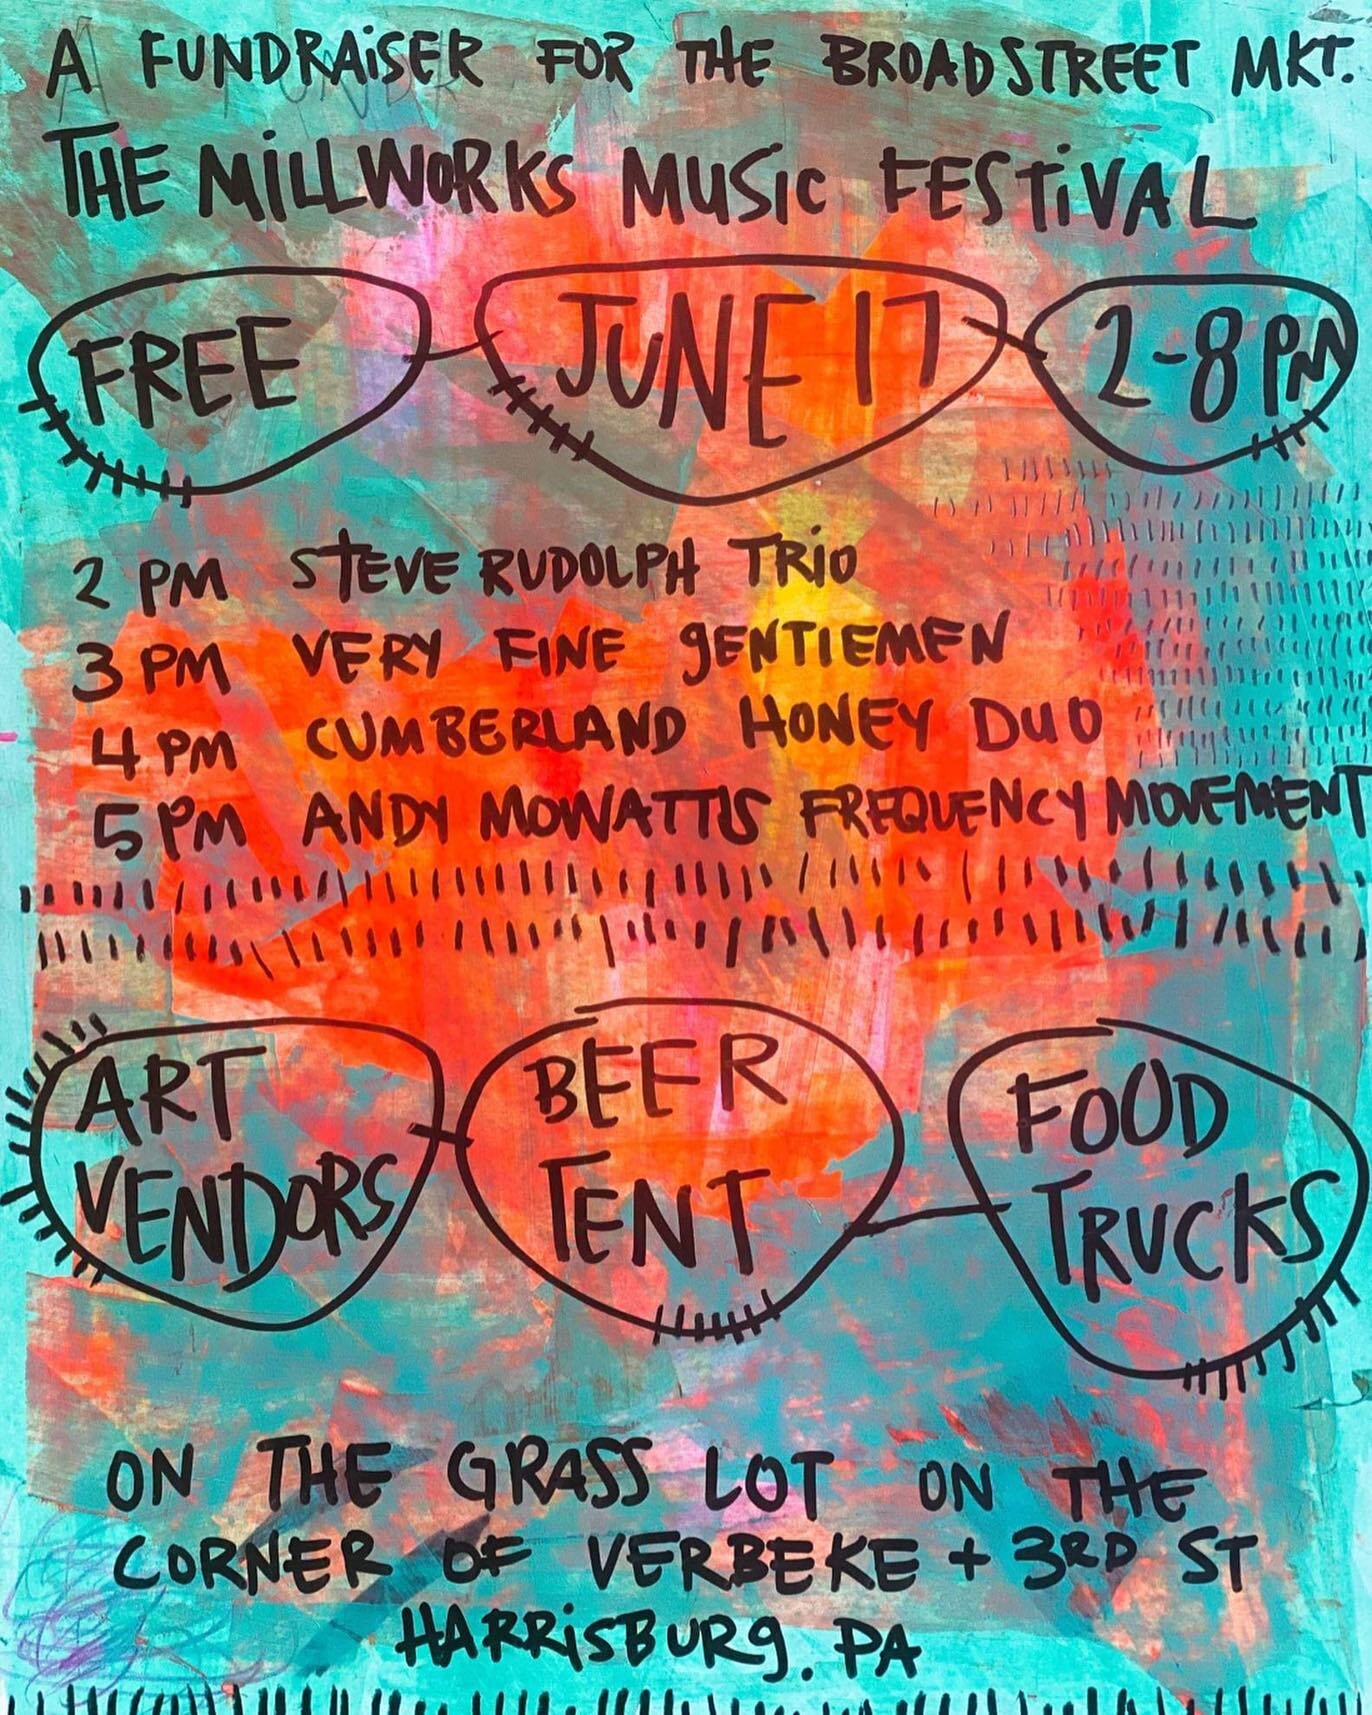 Saturday 6/17: free outdoor all ages show to benefit @broadstreetmarket in Harrisburg PA. Lawn at @the_millworks with Steve Rudolph @theveryfinegentlemen @cumberlandhoneypa @amfm_andy